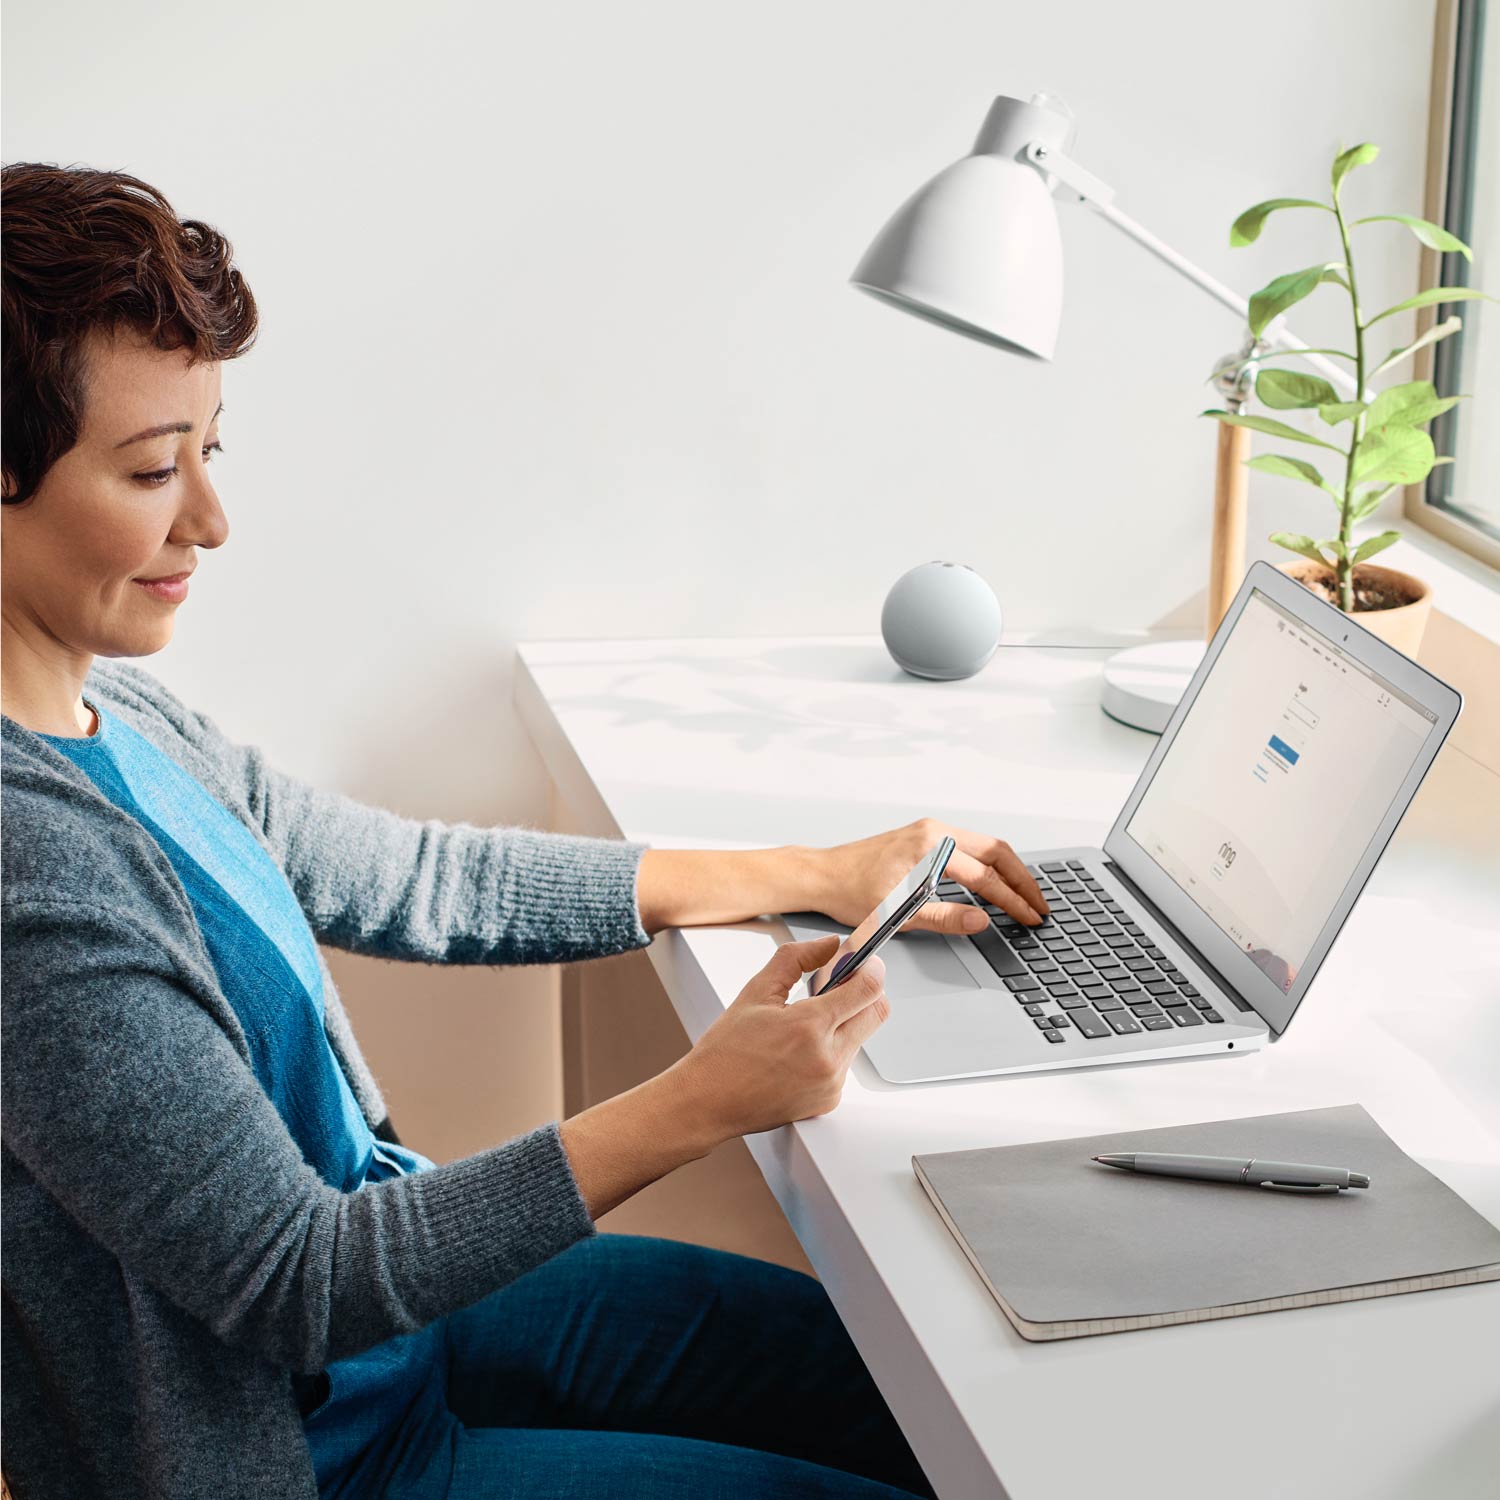 Alarm Pro Base Station (for with built-in eero Wi-Fi 6 router) - Side-view of woman sitting at desk in front of laptop with Ring web page loaded, looking at smartphone in her right hand.